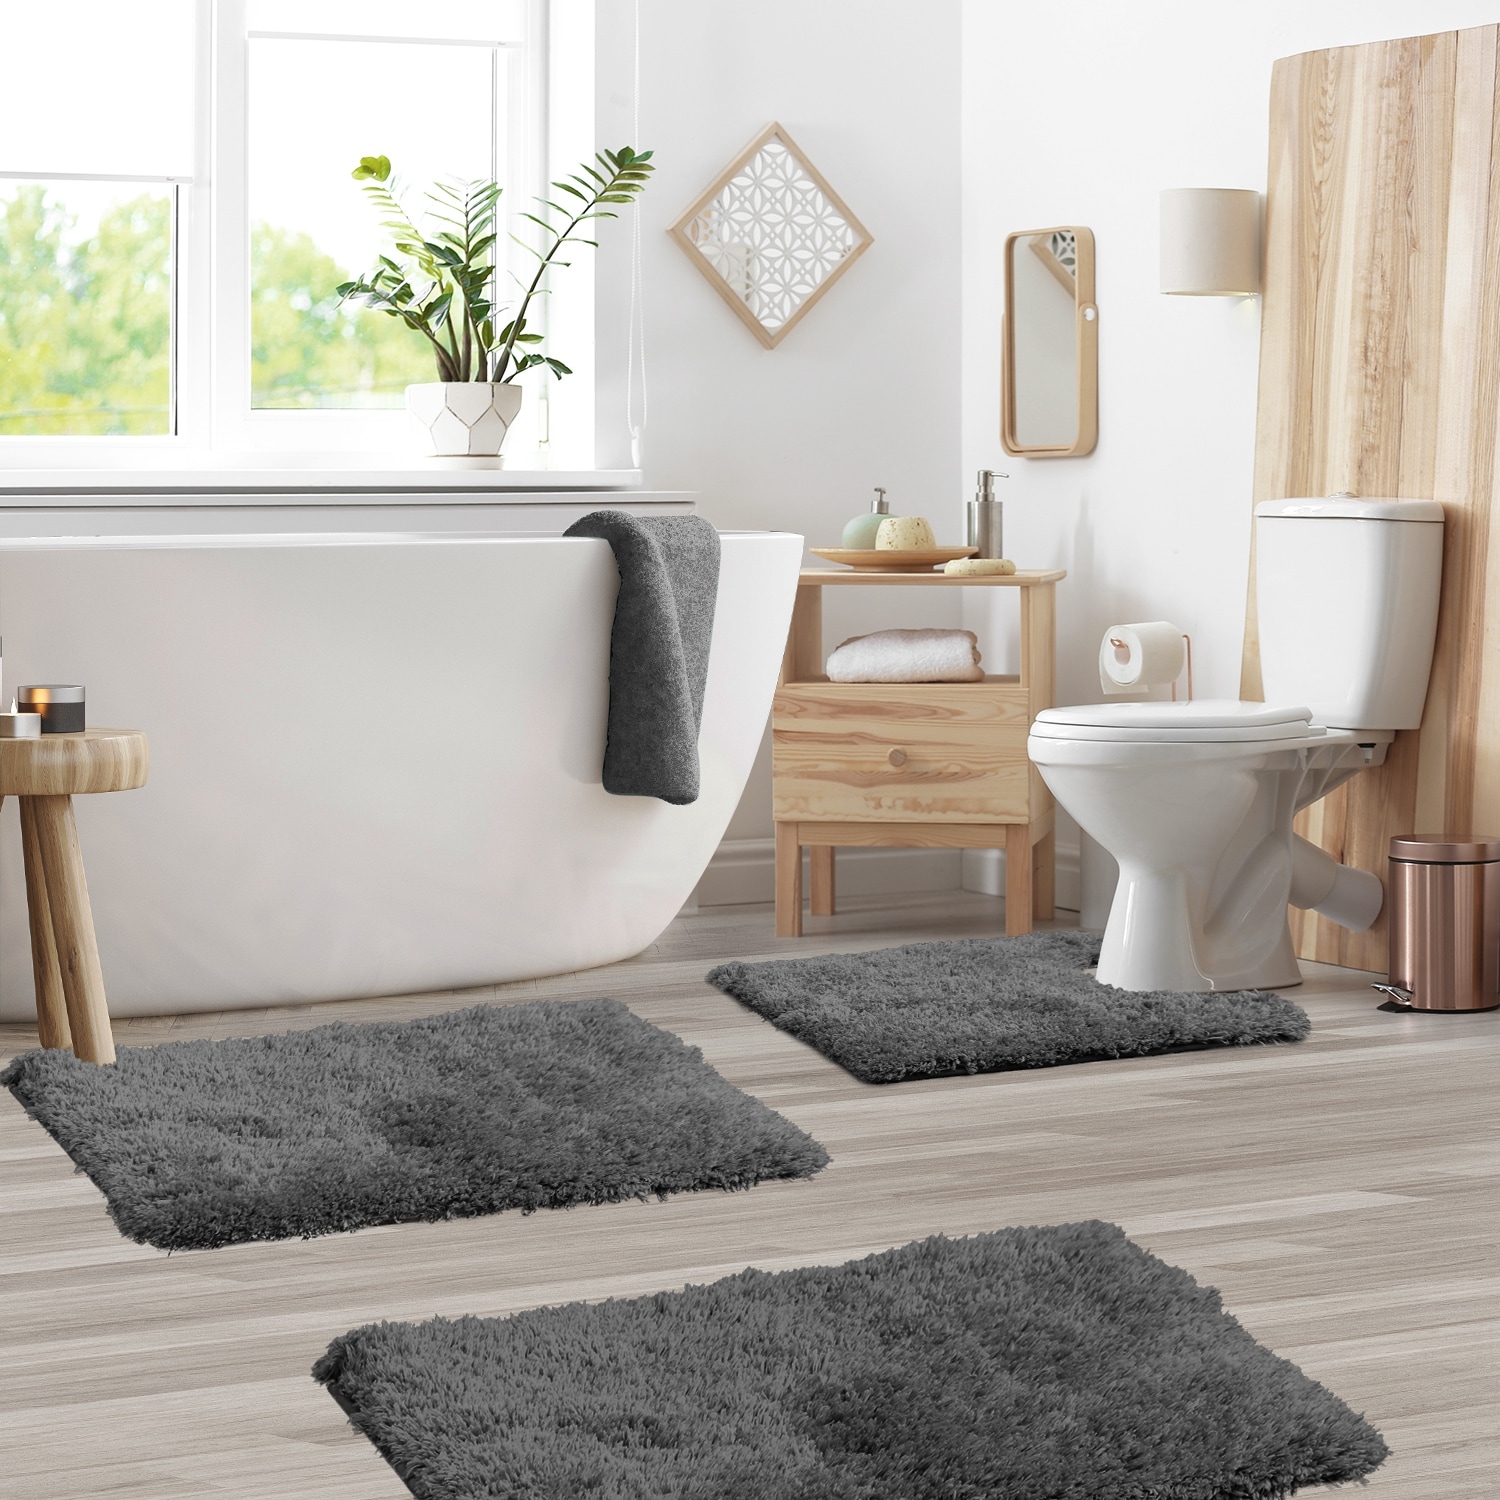 https://ak1.ostkcdn.com/images/products/is/images/direct/0205a1ff082f8407ee1b7cee97c9db4b571e137c/Clara-Clark-Shaggy-Bath-Rug-with-Non-Slip-Backing-Rubber---3-Piece-Set.jpg